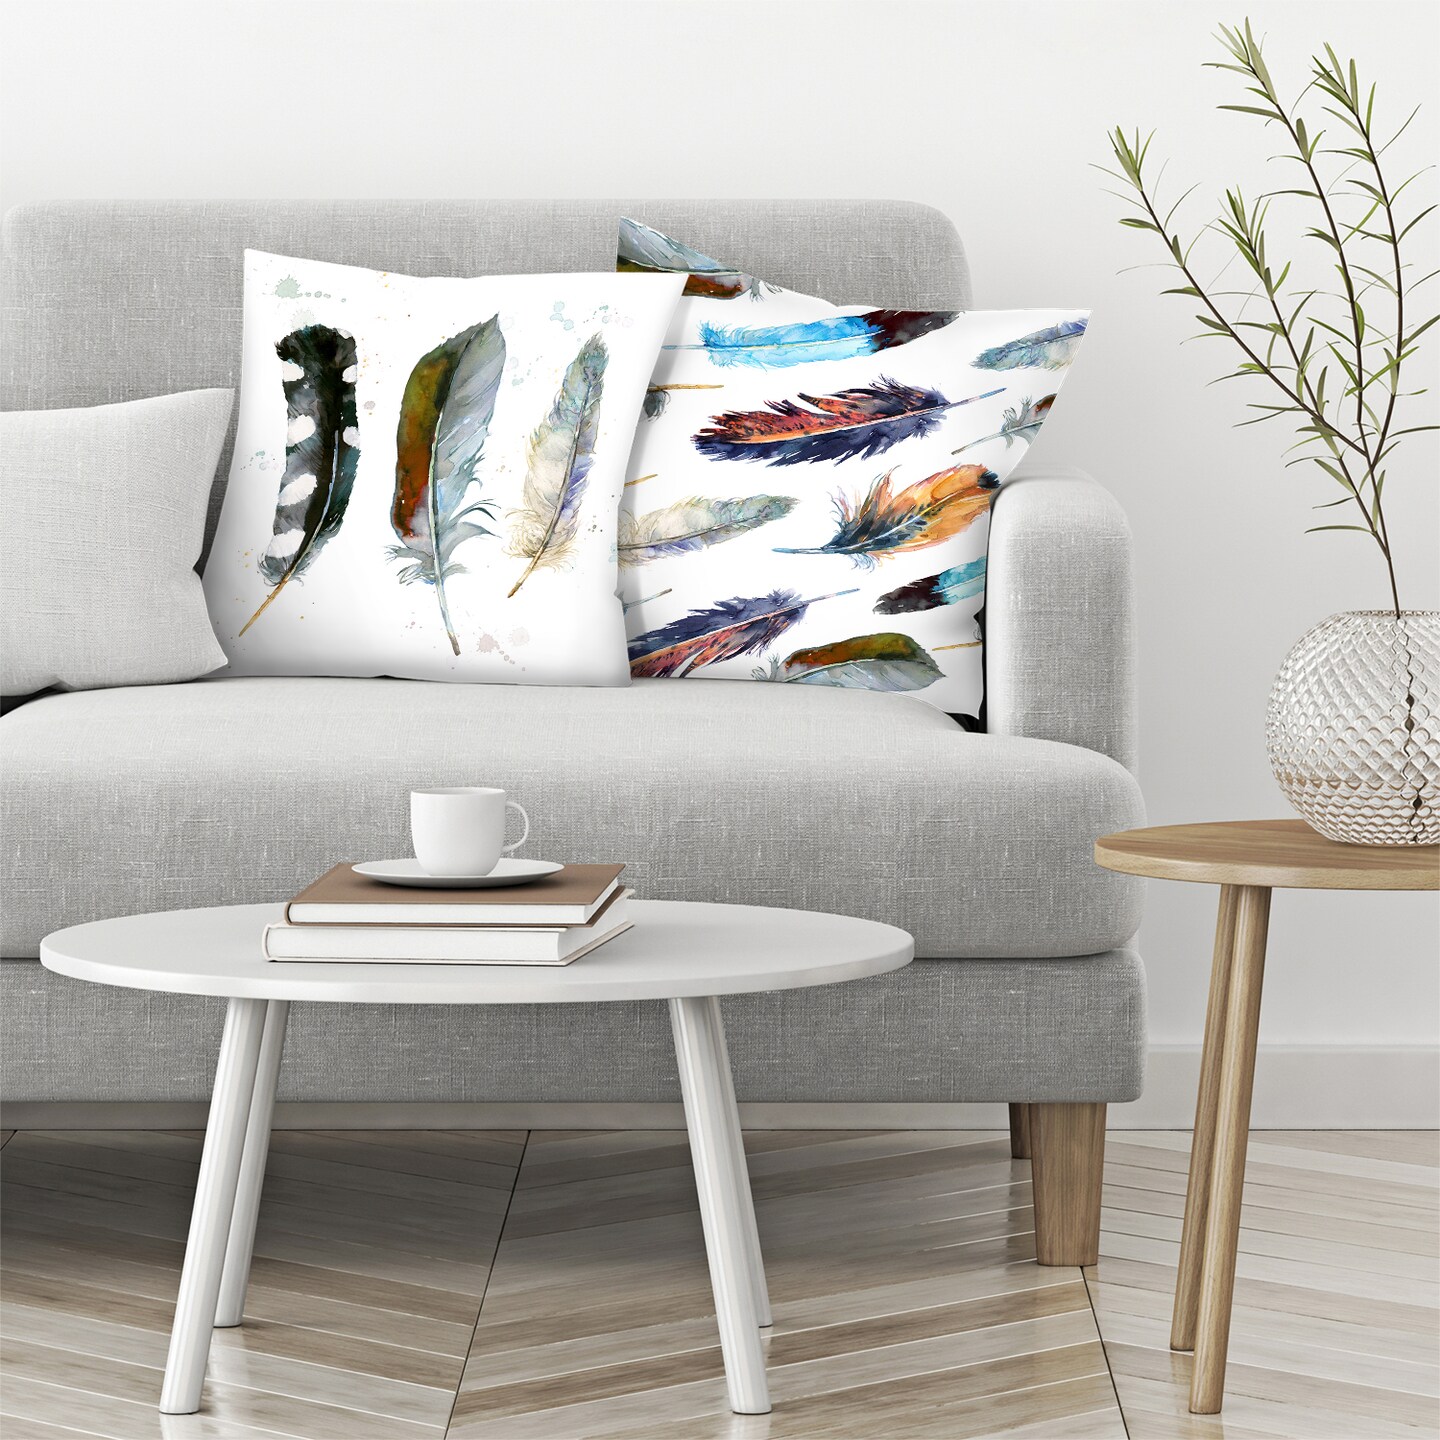 Feathers 2 and Feathers 1 by Harrison Ripley Set of 2 Throw Pillows Americanflat